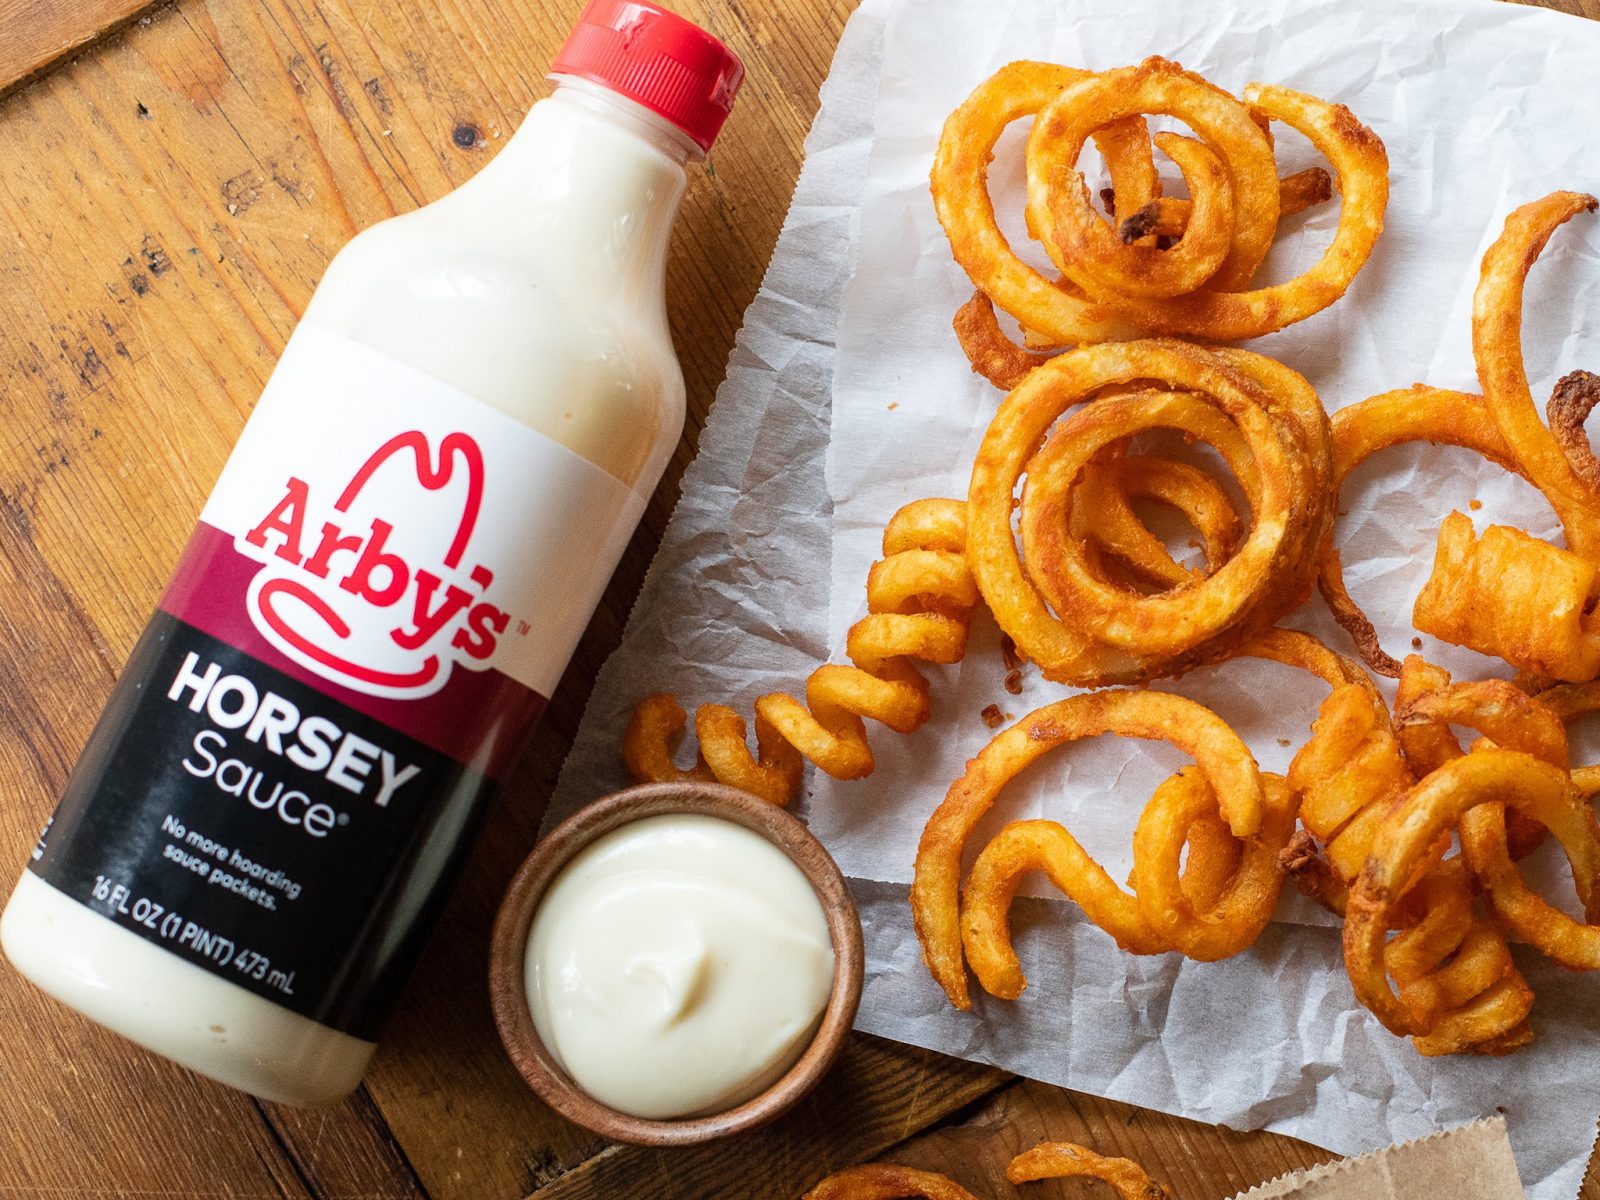 Arby’s Sauce or Horsey Sauce As Low As $1.49 At Kroger